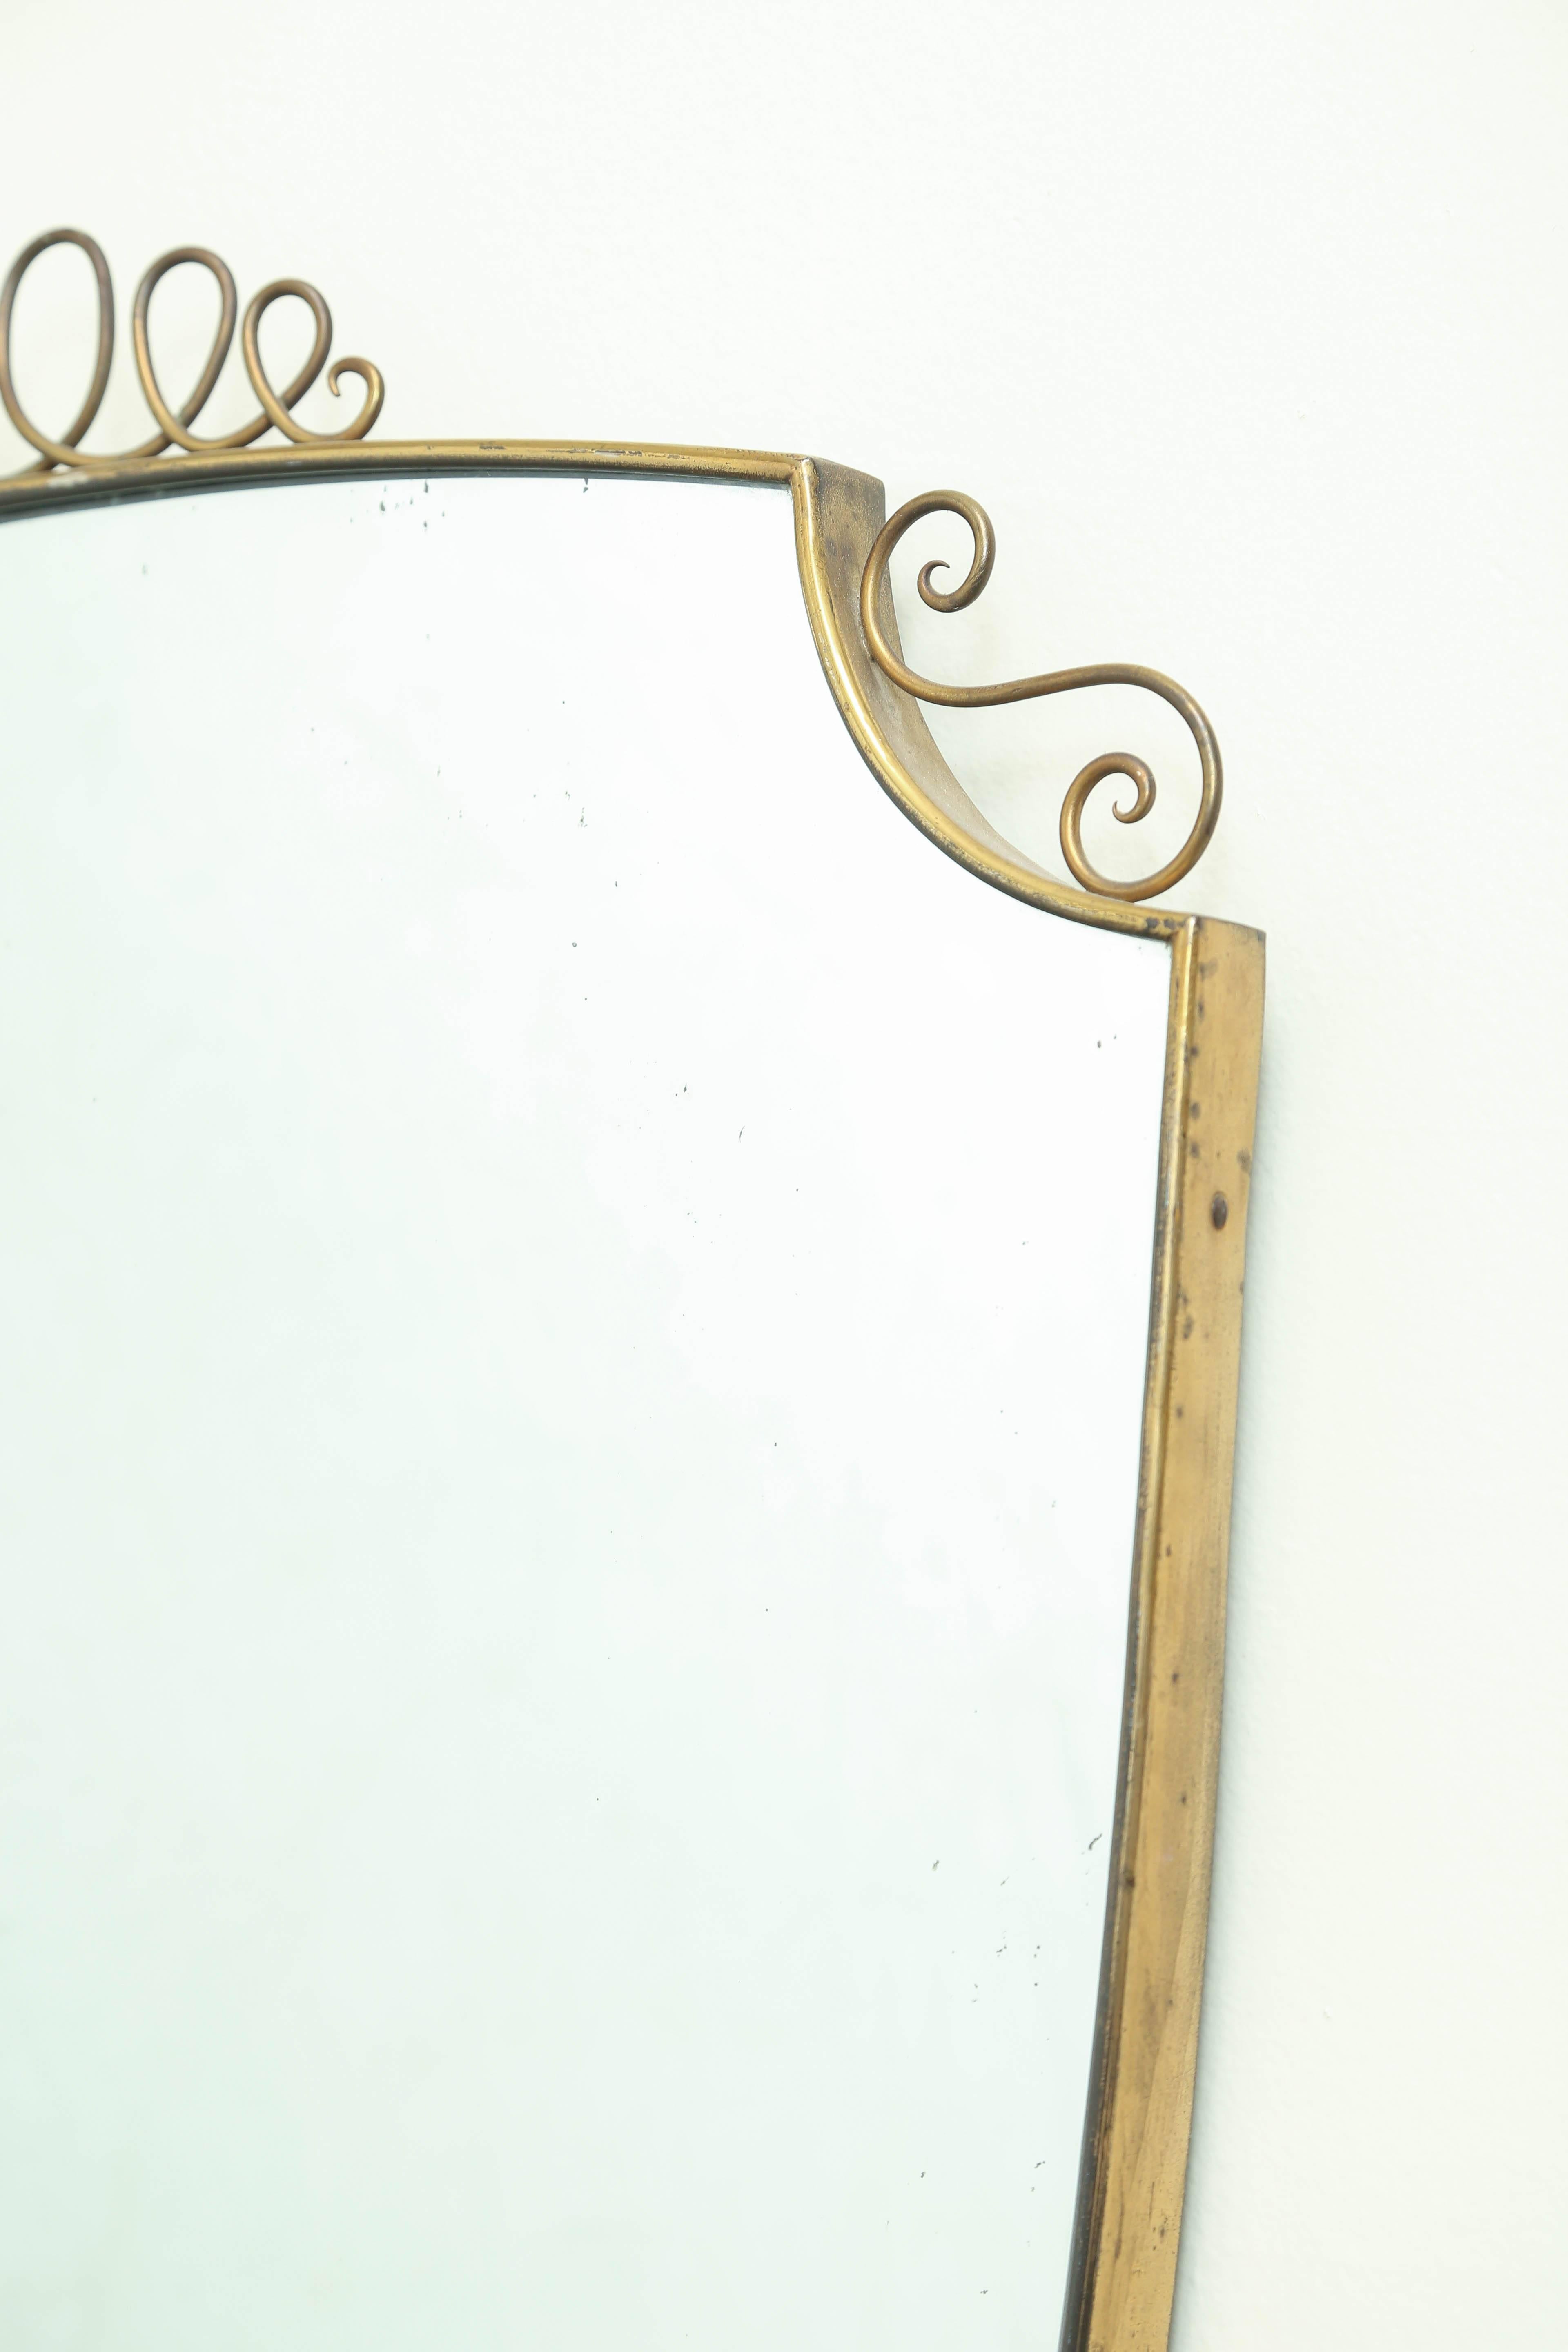 A large 1950s, Italian shield shape brass frame mirror in the style of Gio Ponti.
The frame is handmade with top multi loop and side scroll accents.